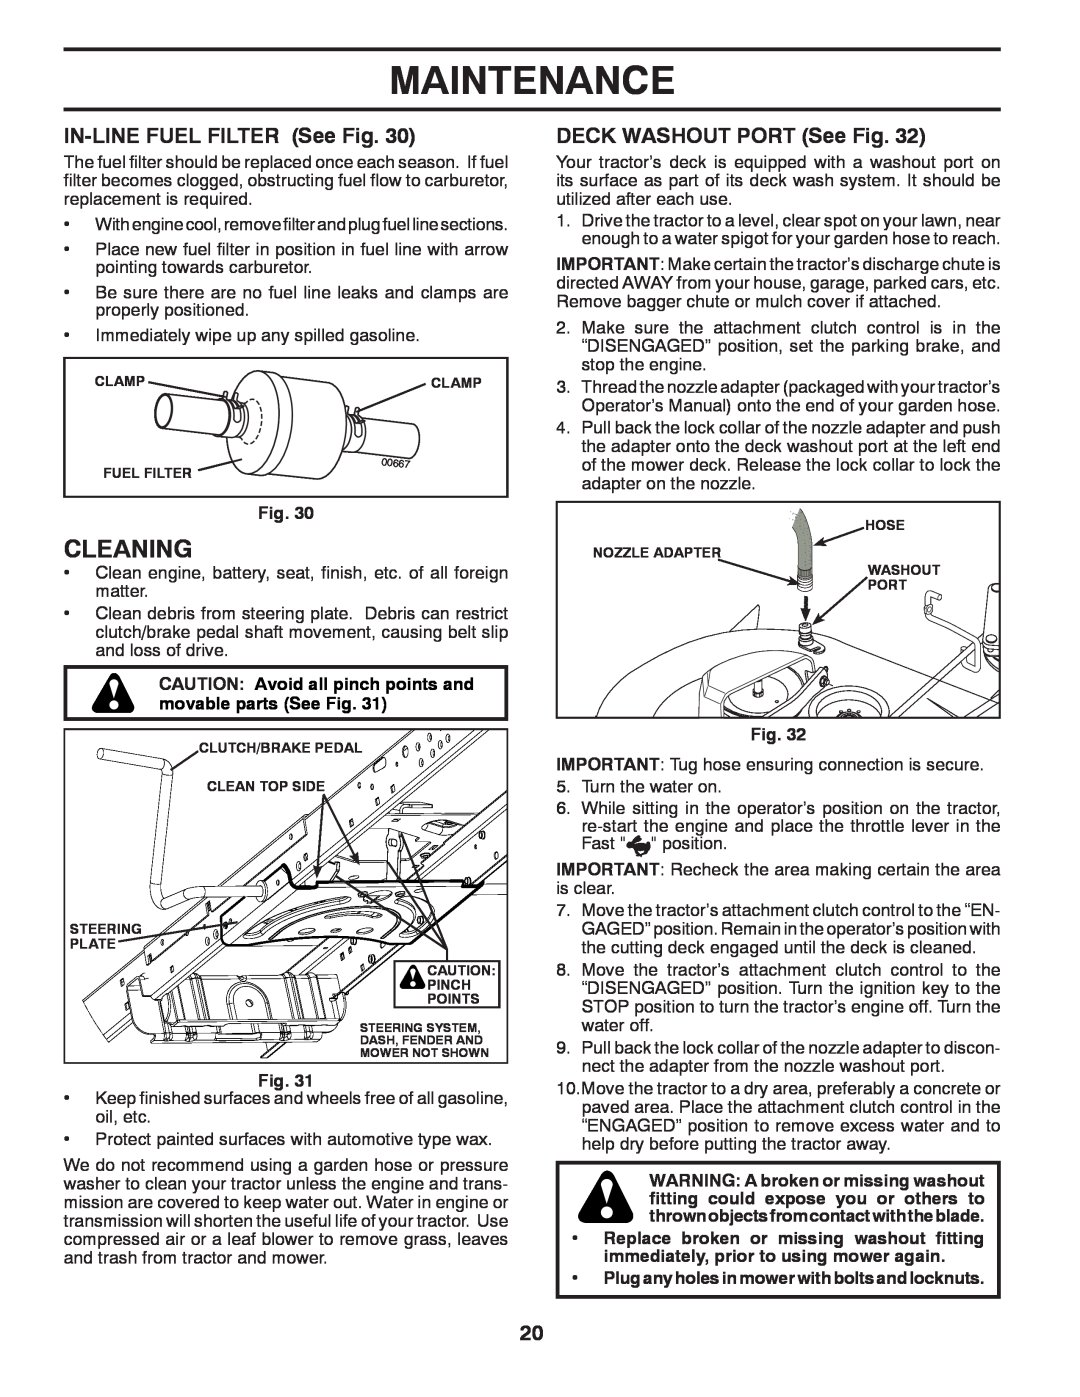 Dixon 435068, D25K48YT manual Cleaning, IN-LINEFUEL FILTER See Fig, DECK WASHOUT PORT See Fig, Maintenance 